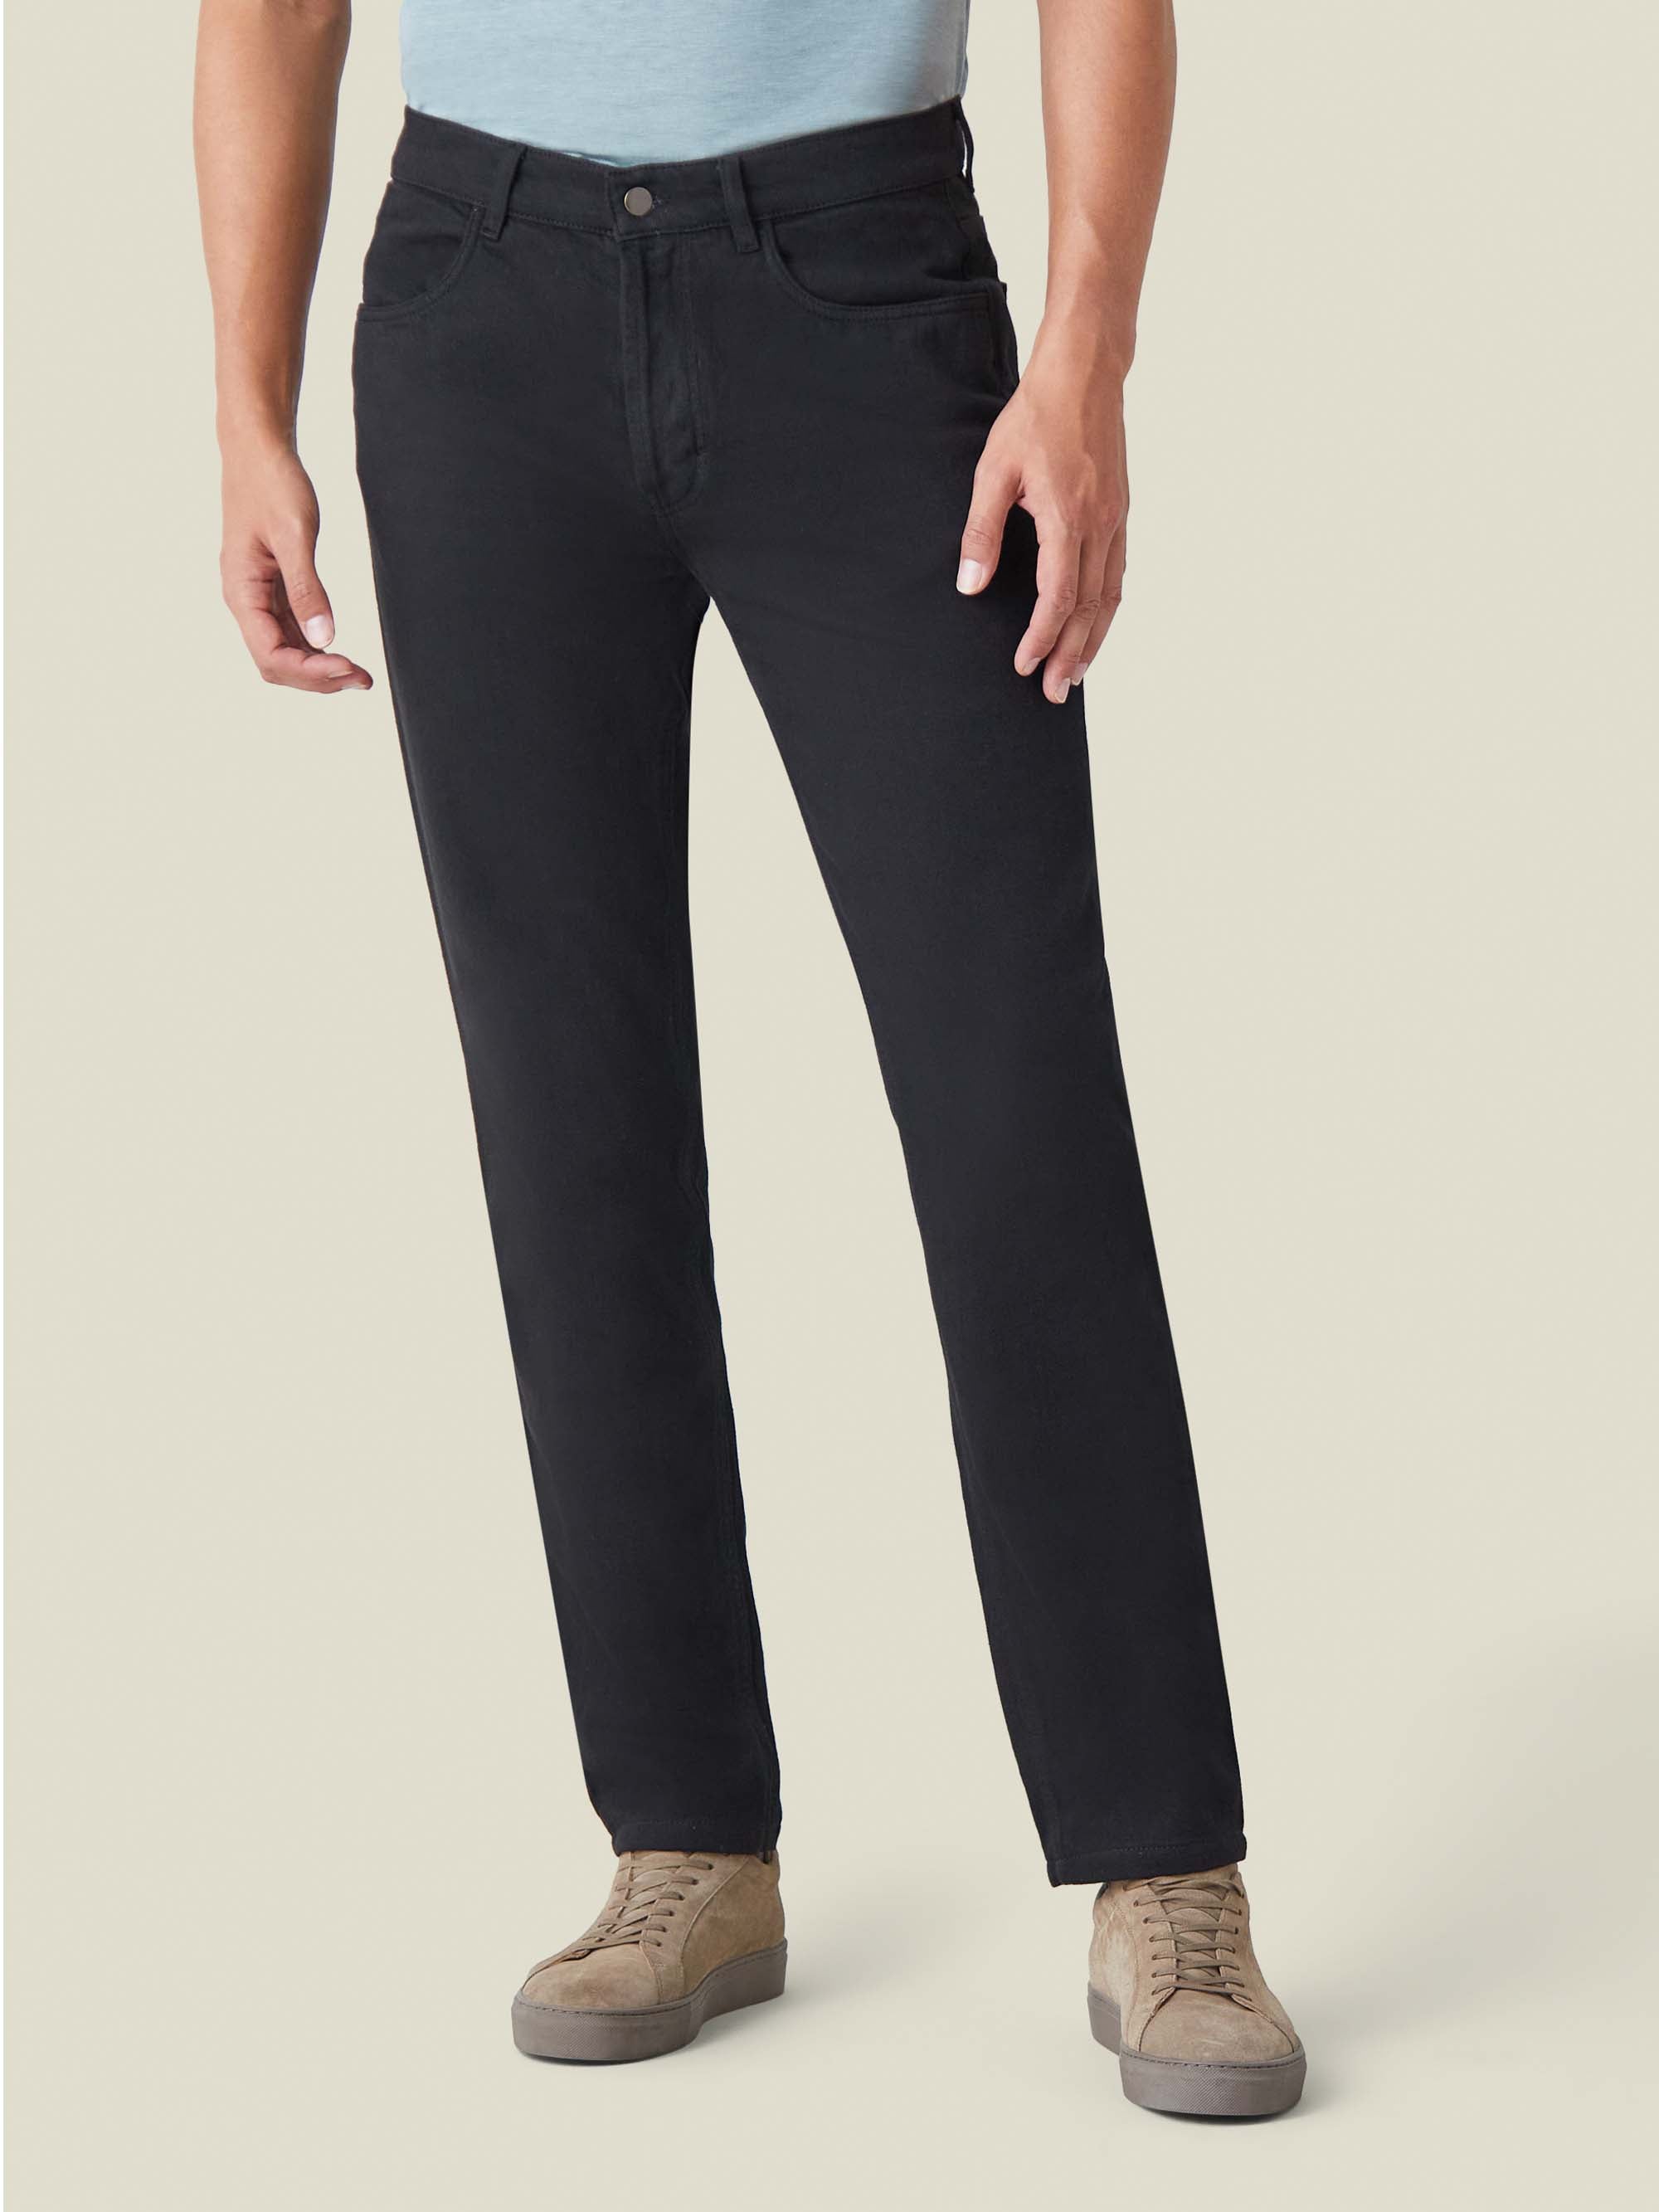 Black Jeans product